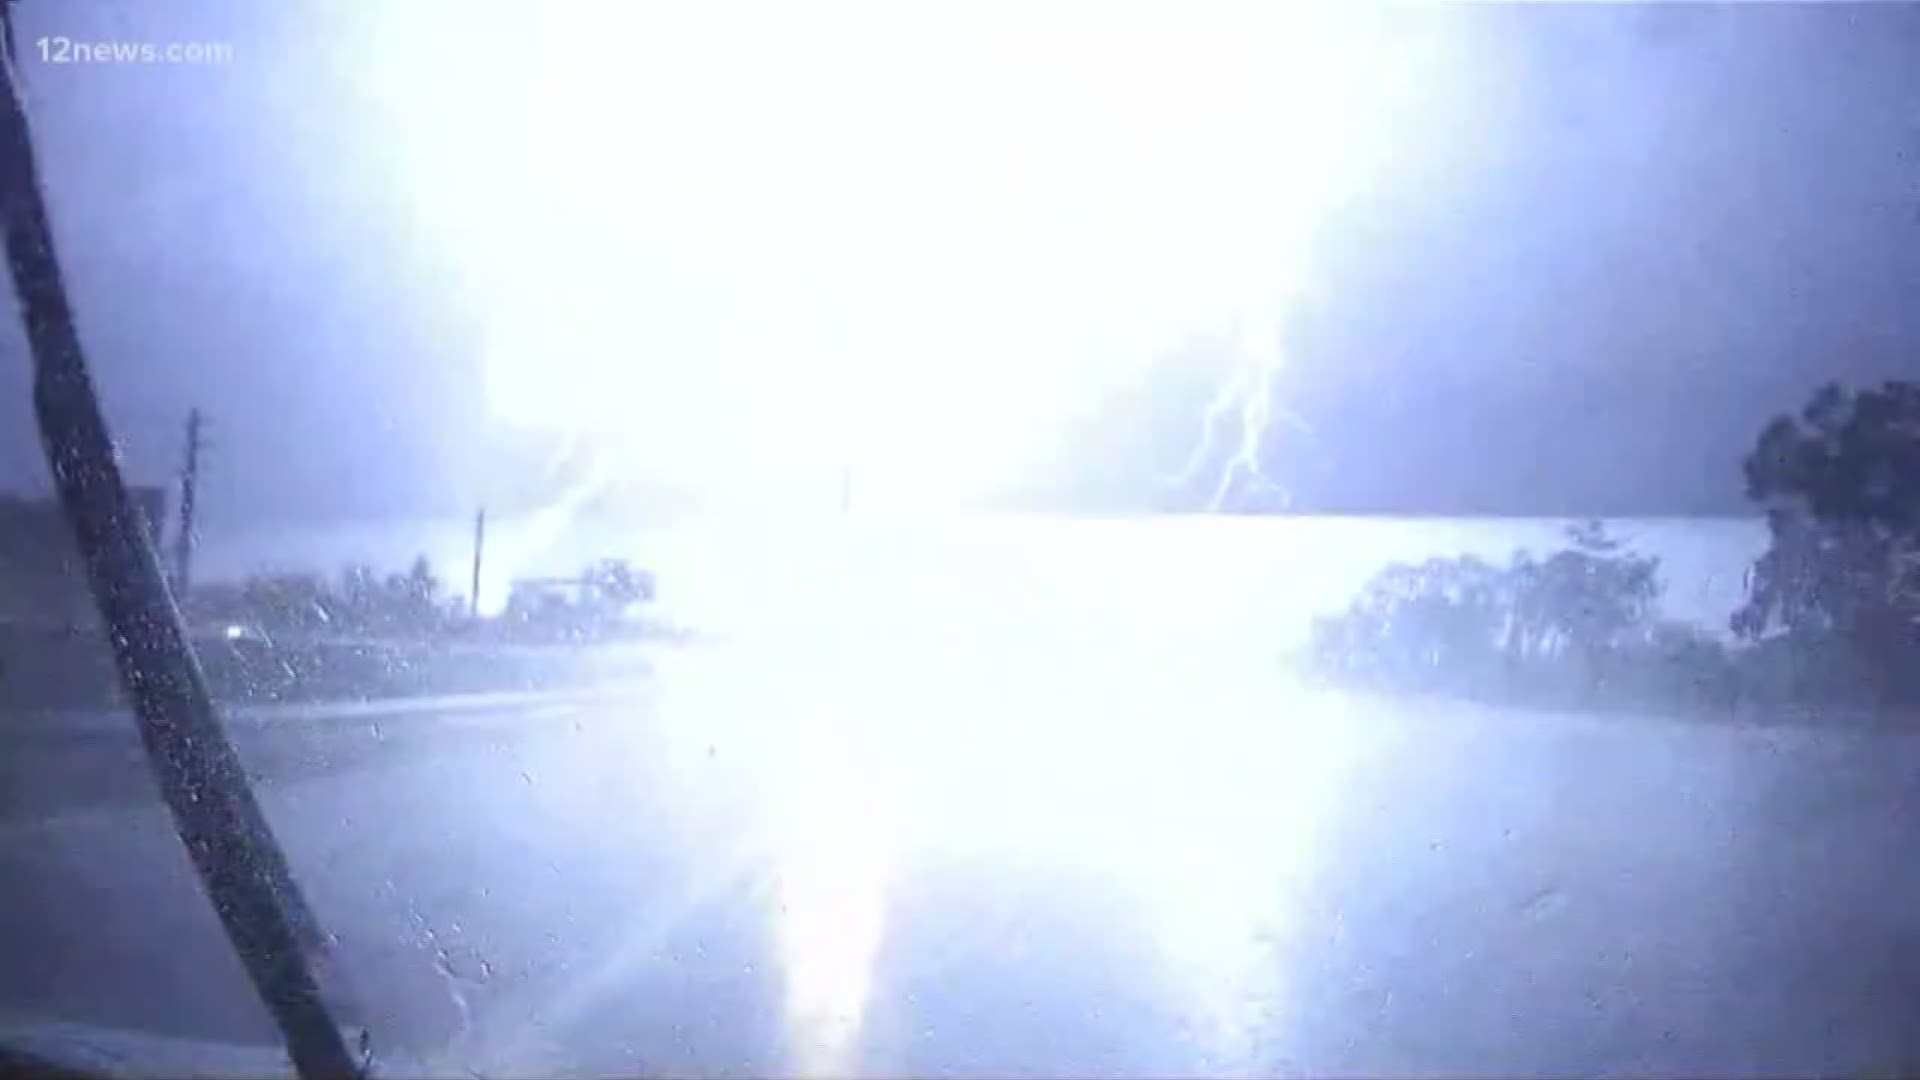 Rain and dust have rolled in hitting parts of the Valley. Check out some of the lightning our storm tracker caught on camera.